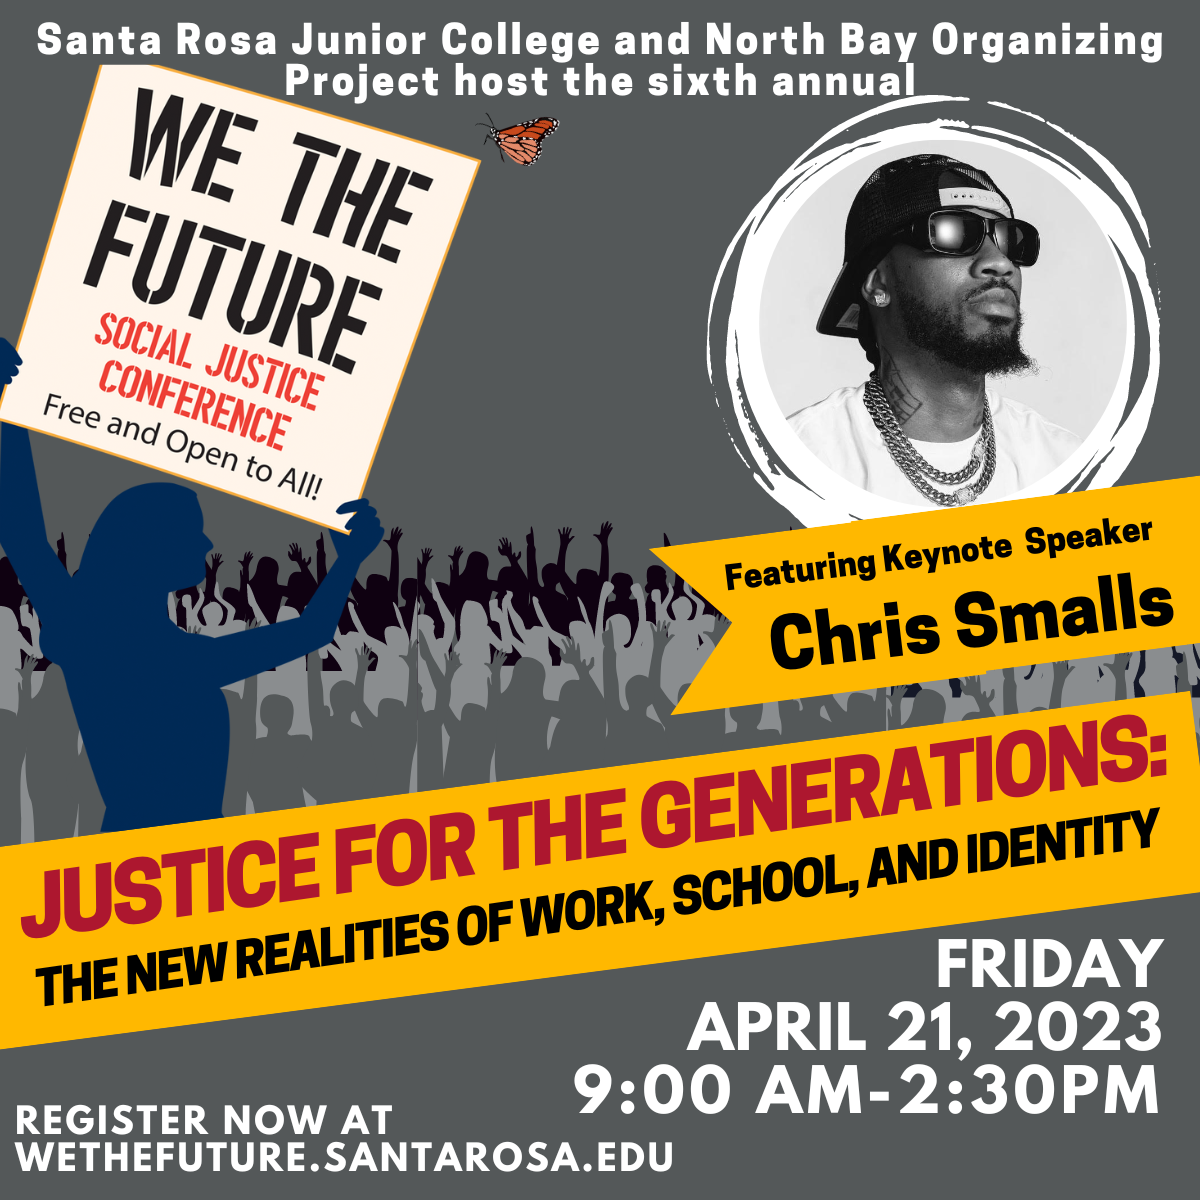 flyer for We The Future social justice conference